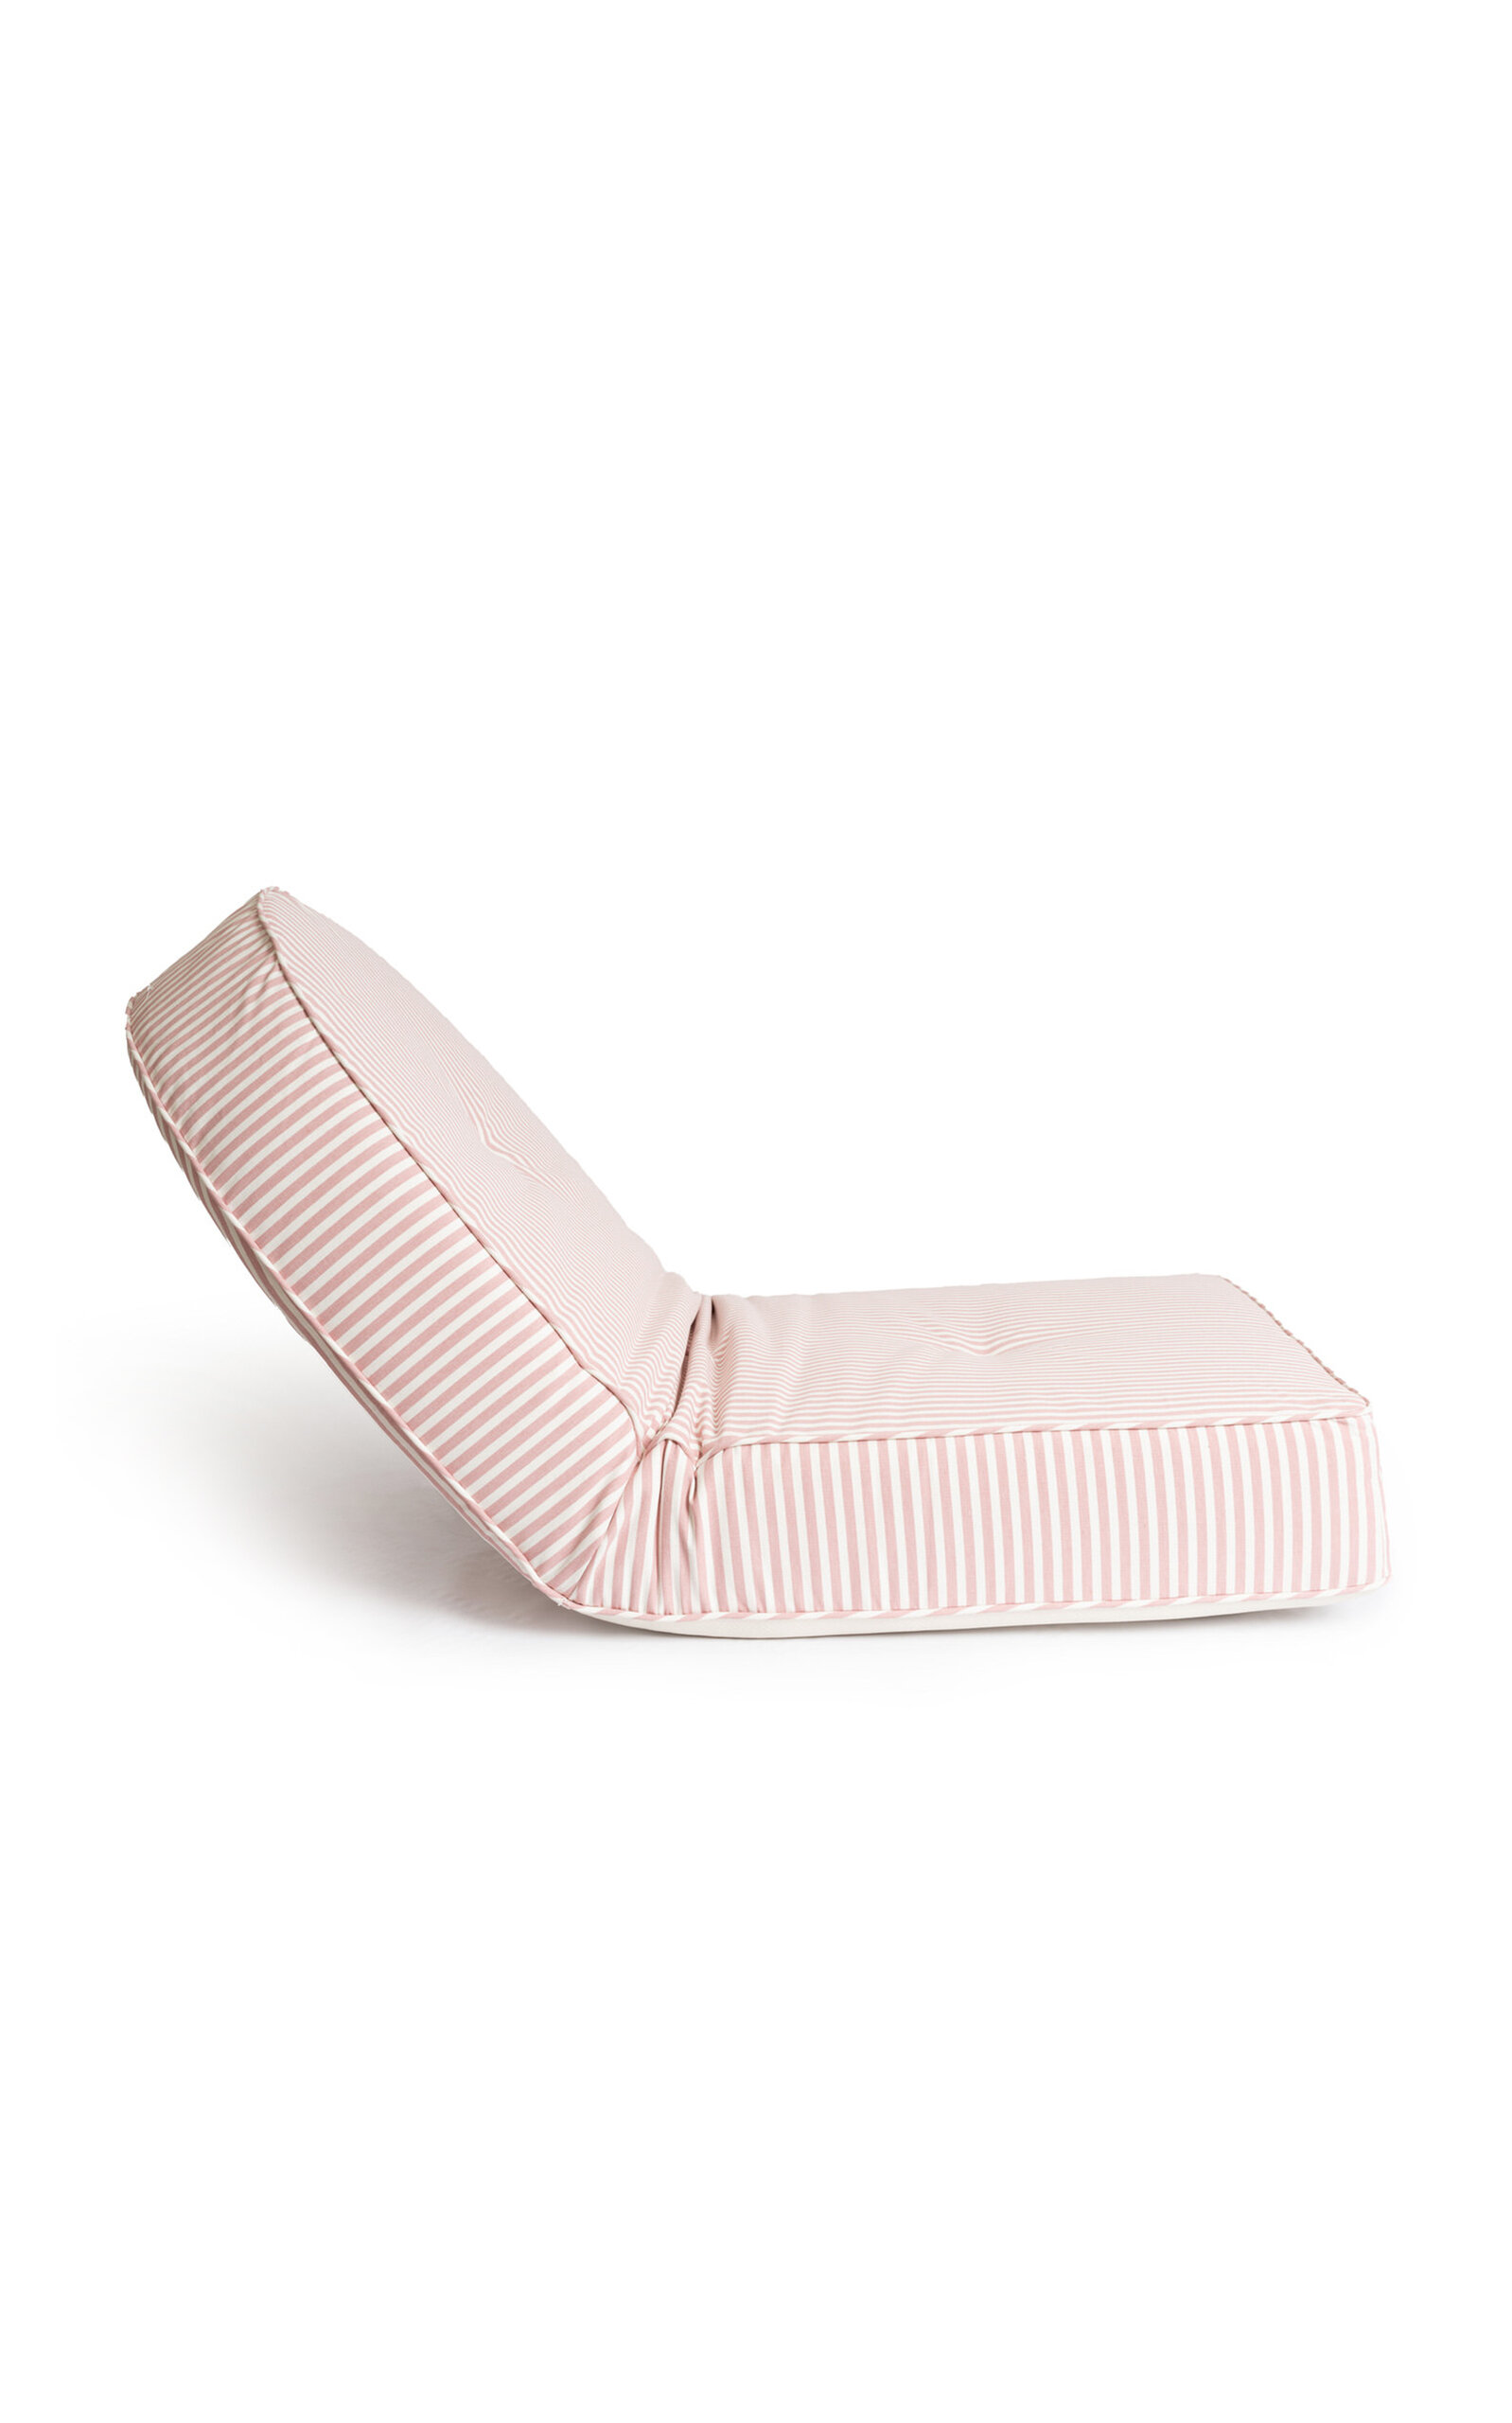 Shop Business & Pleasure The Reclining Pillow Lounger In Pink